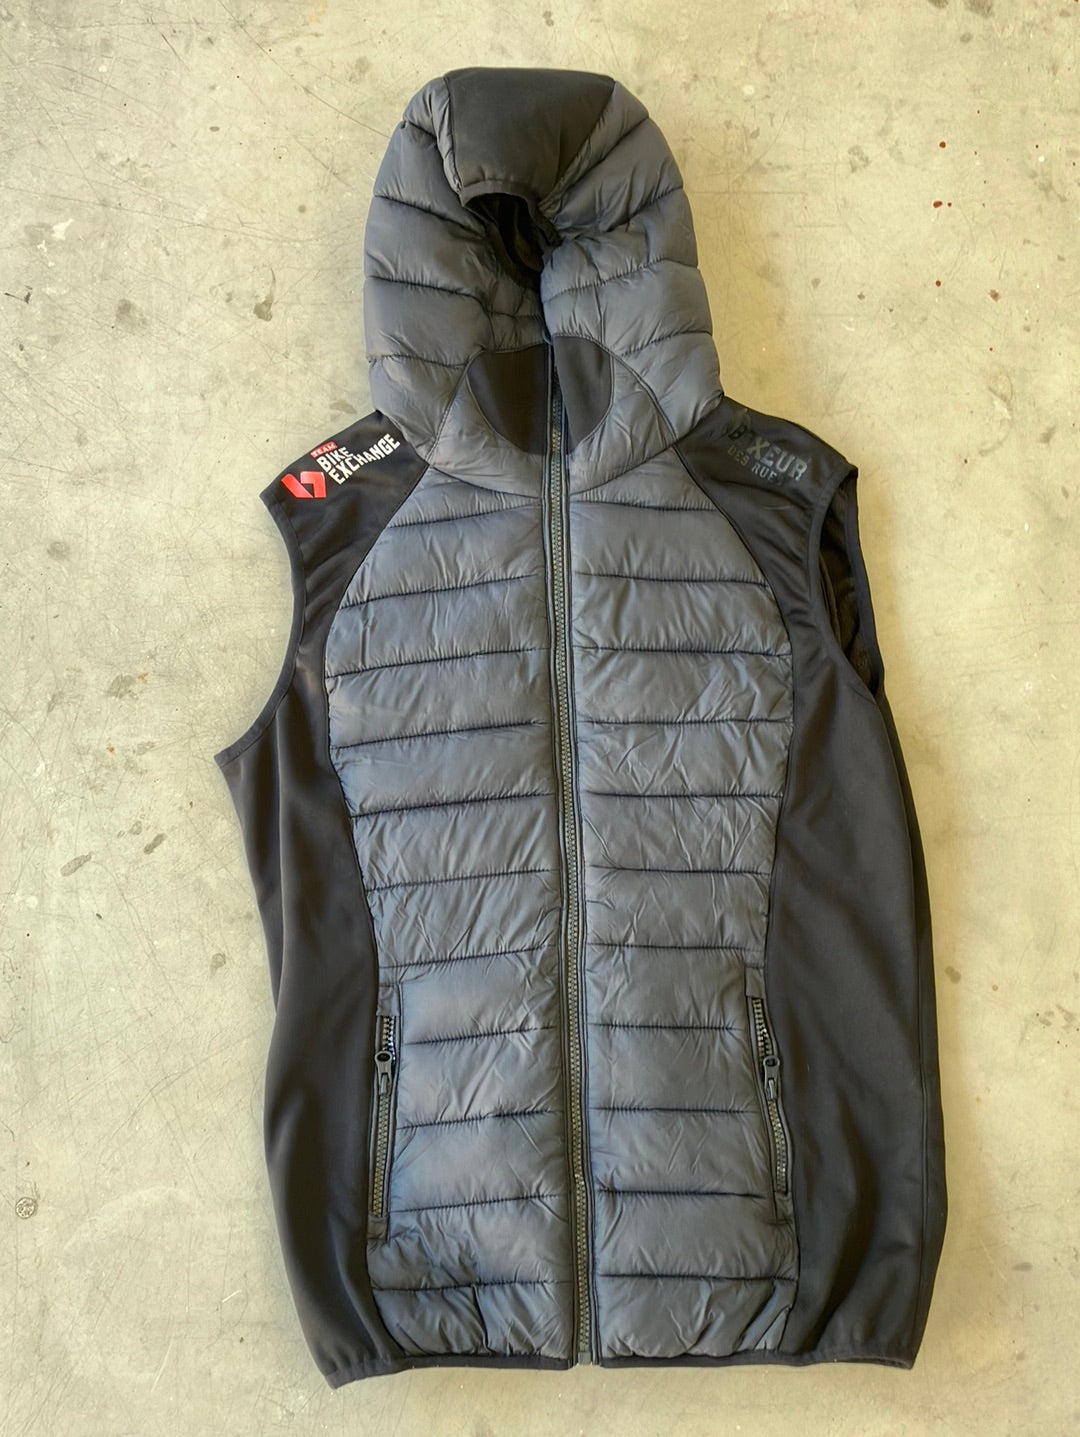 Casual Hooded Vest / Gilet Thermal Padded Jacket team-Issued | Giordana | Bianchi Bike Exchange | Pro Cycling Kit